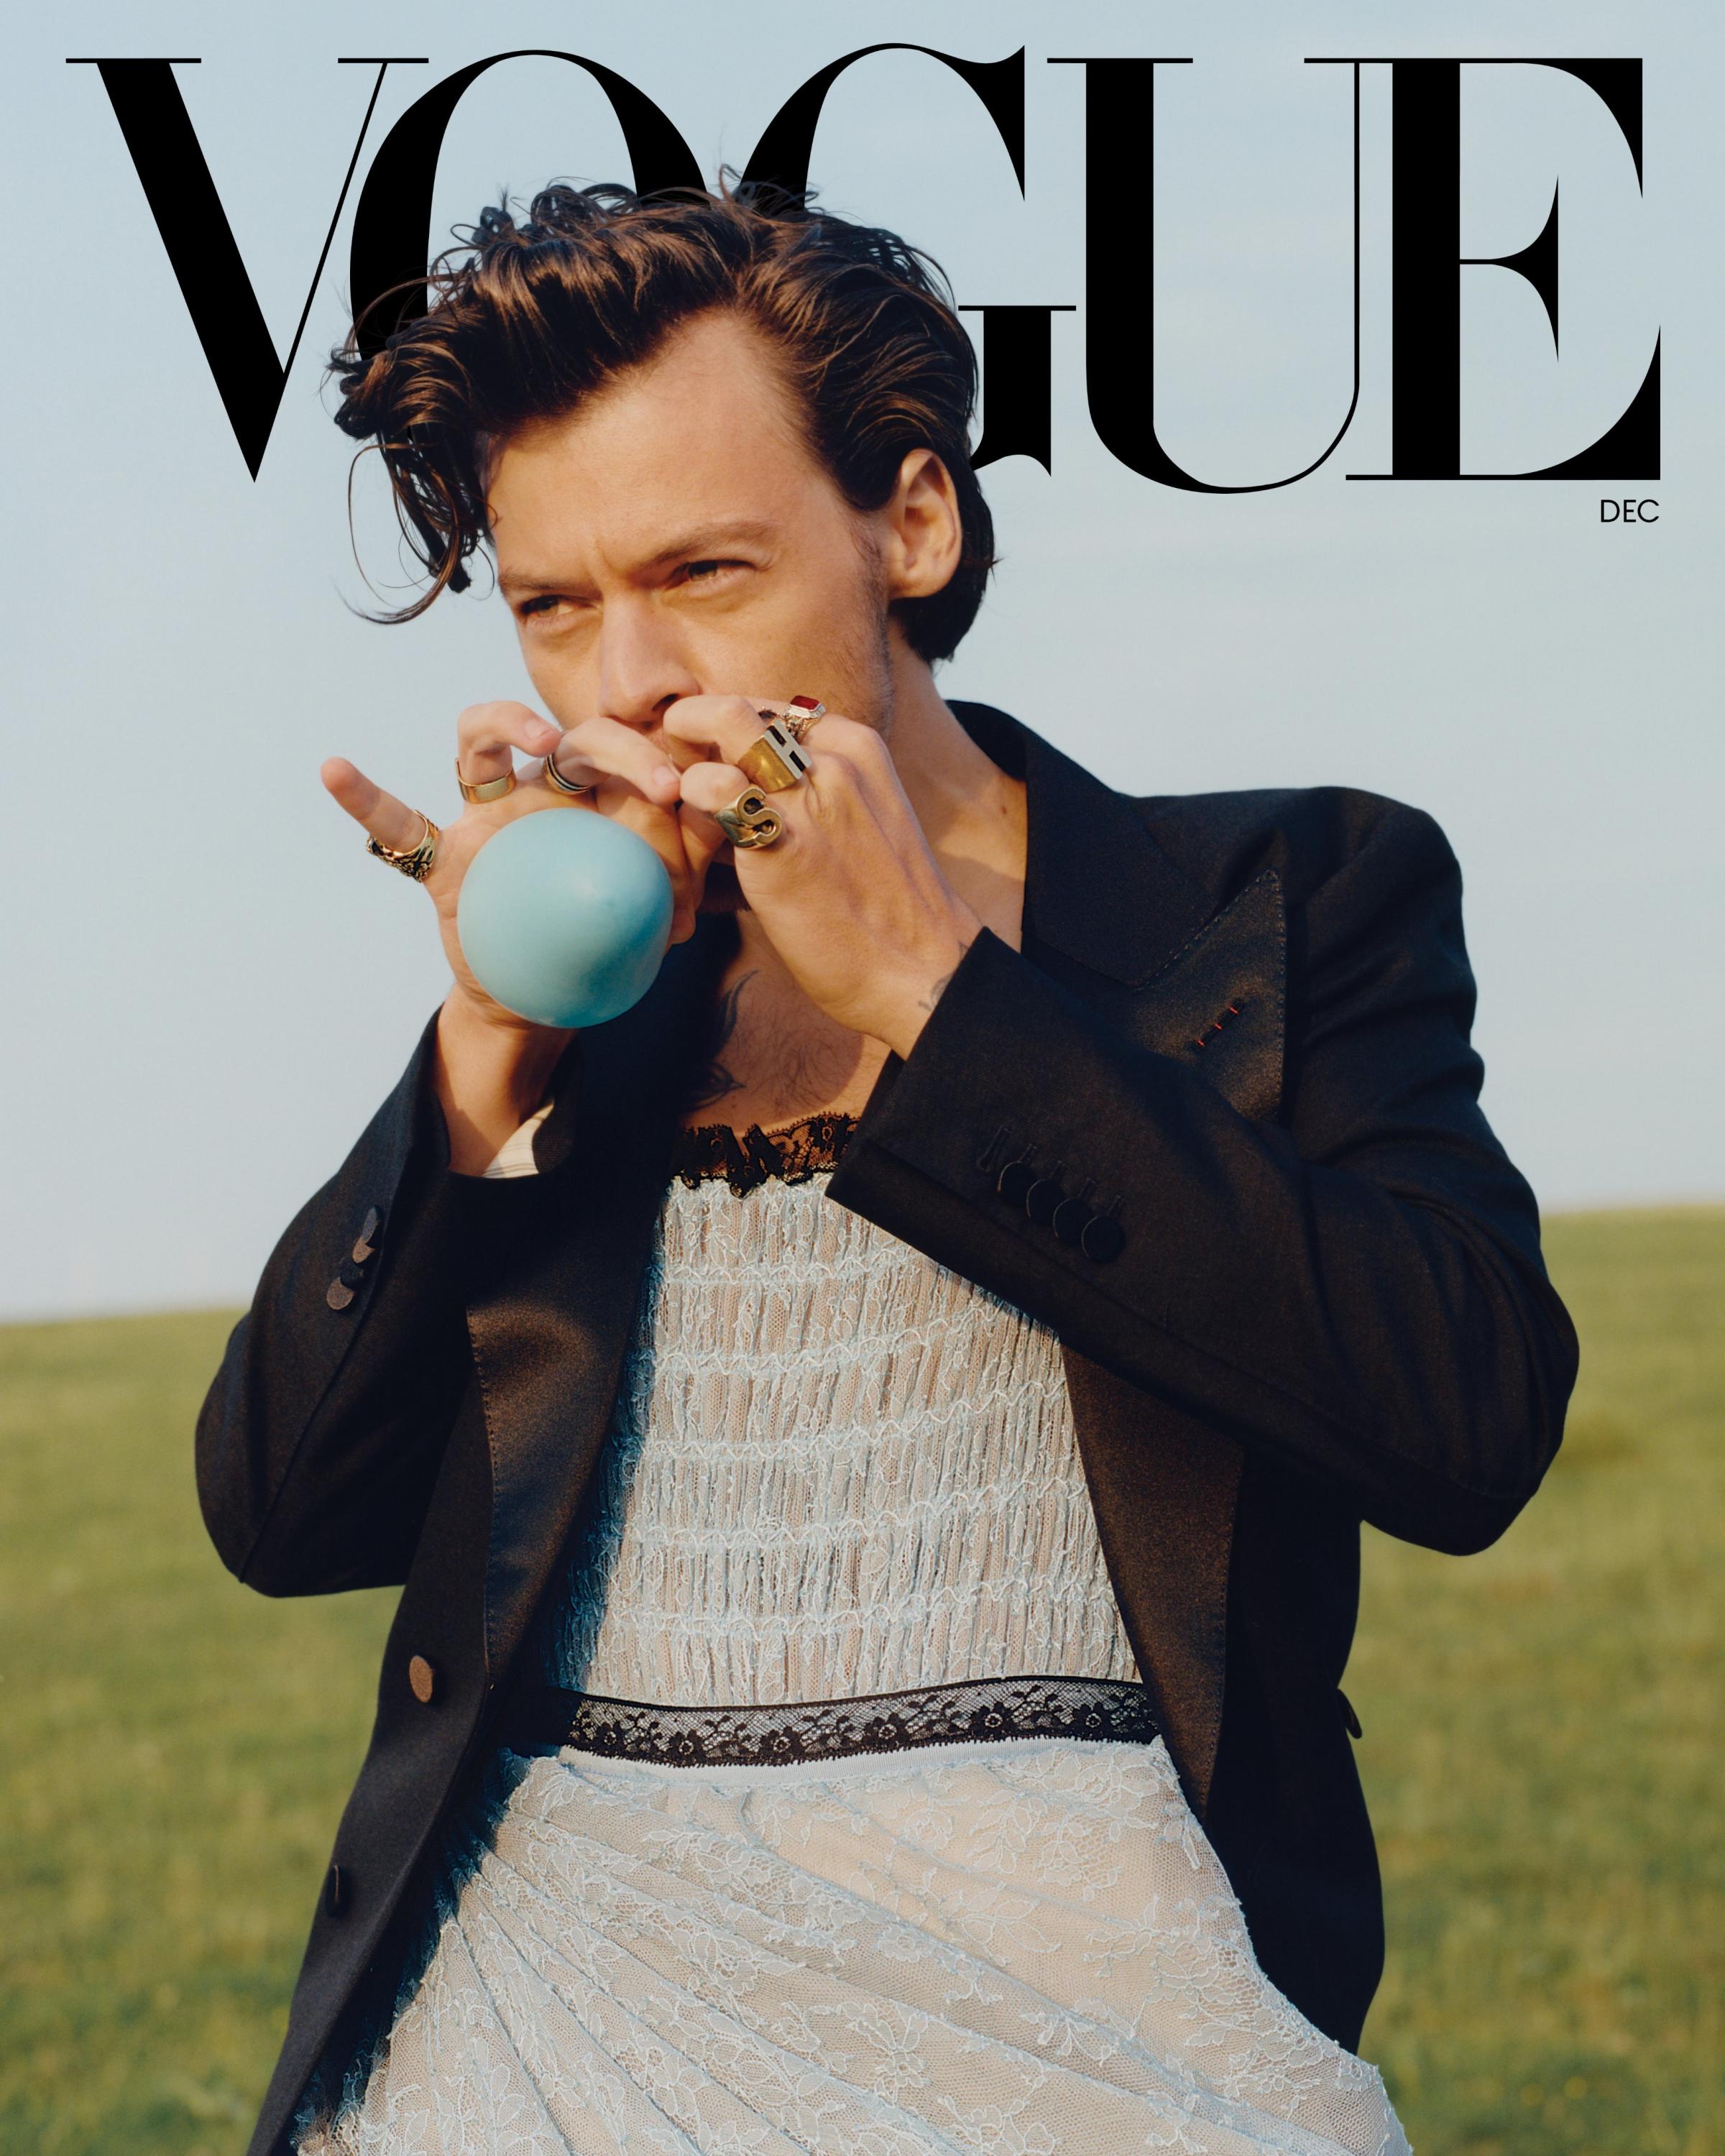 Harry Styles was the first man to appear on the front cover of Vogue